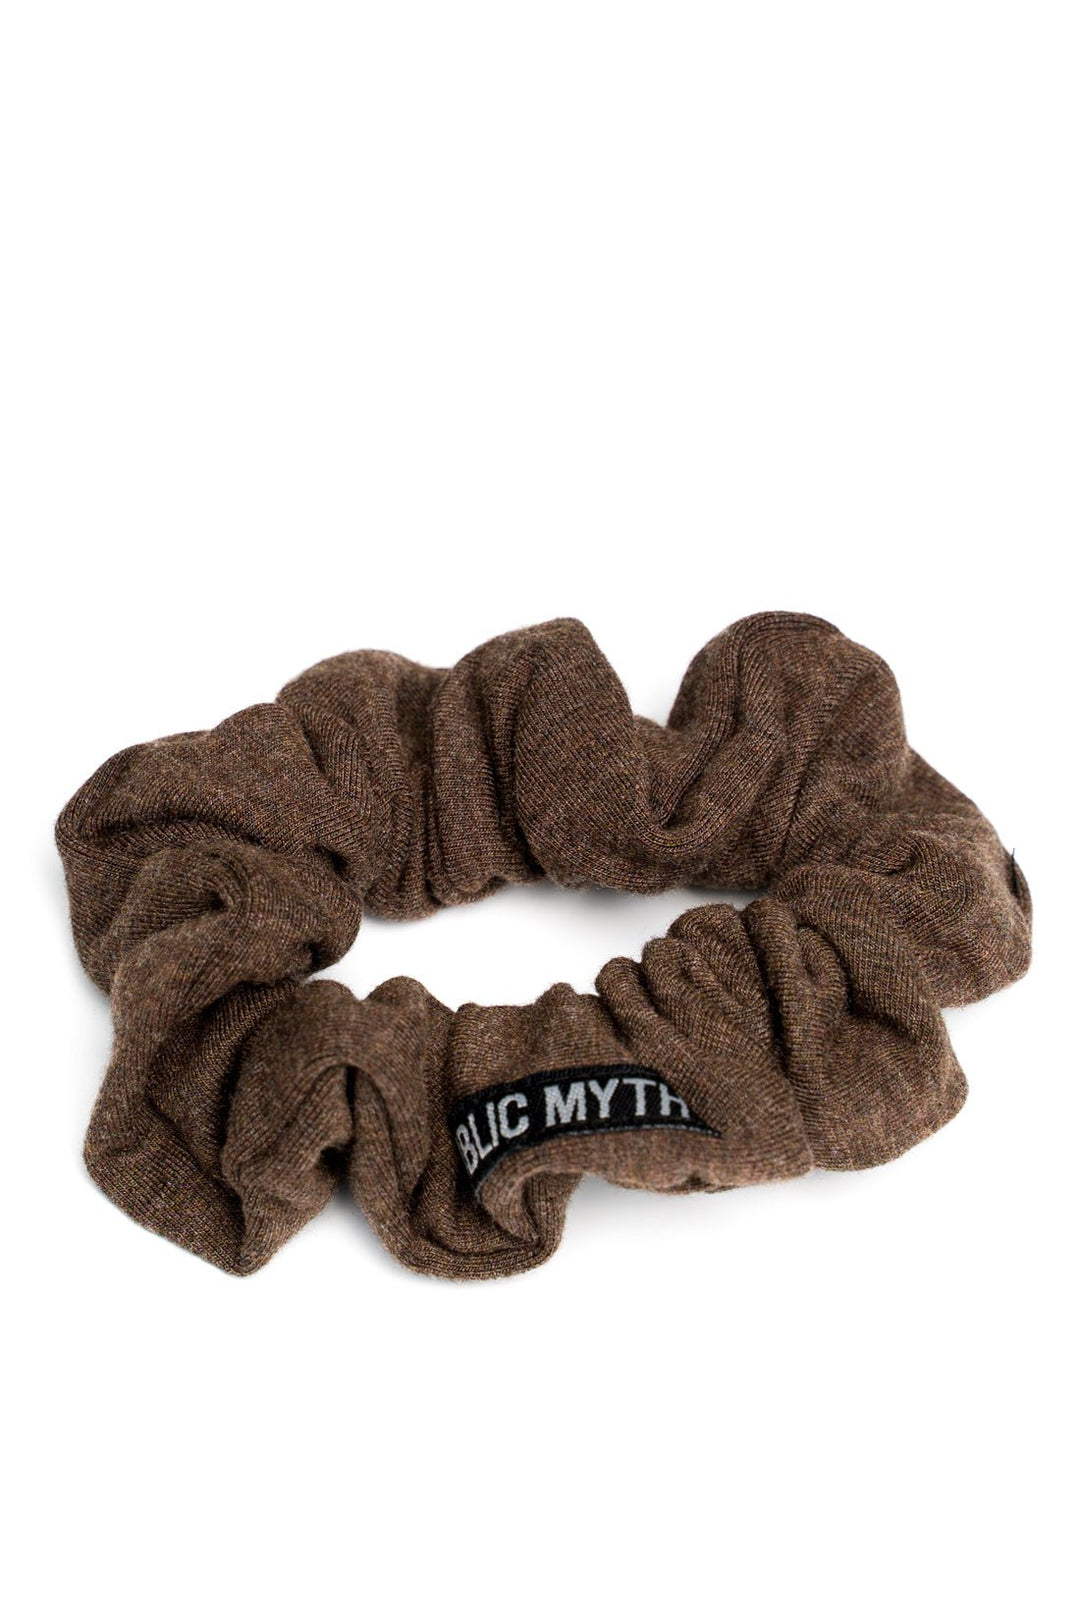 cocoa brown bamboo scrunchie